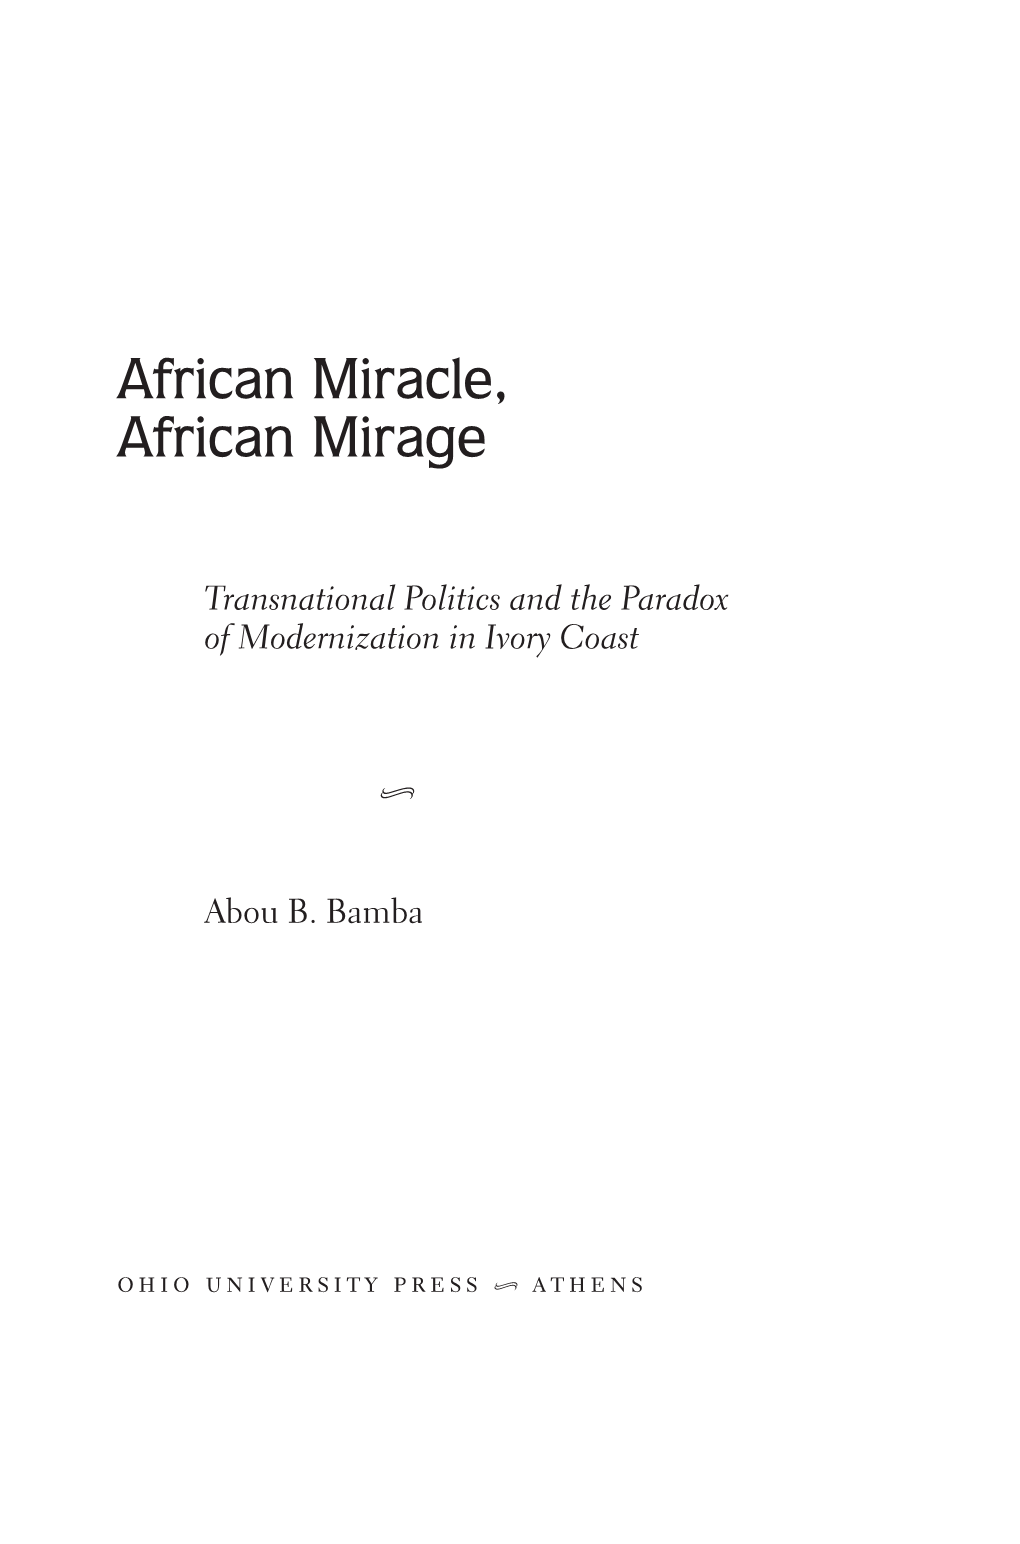 13814-African Miracles African Mirage-Bamba.Indd 3 8/8/16 8:55 AM Contents